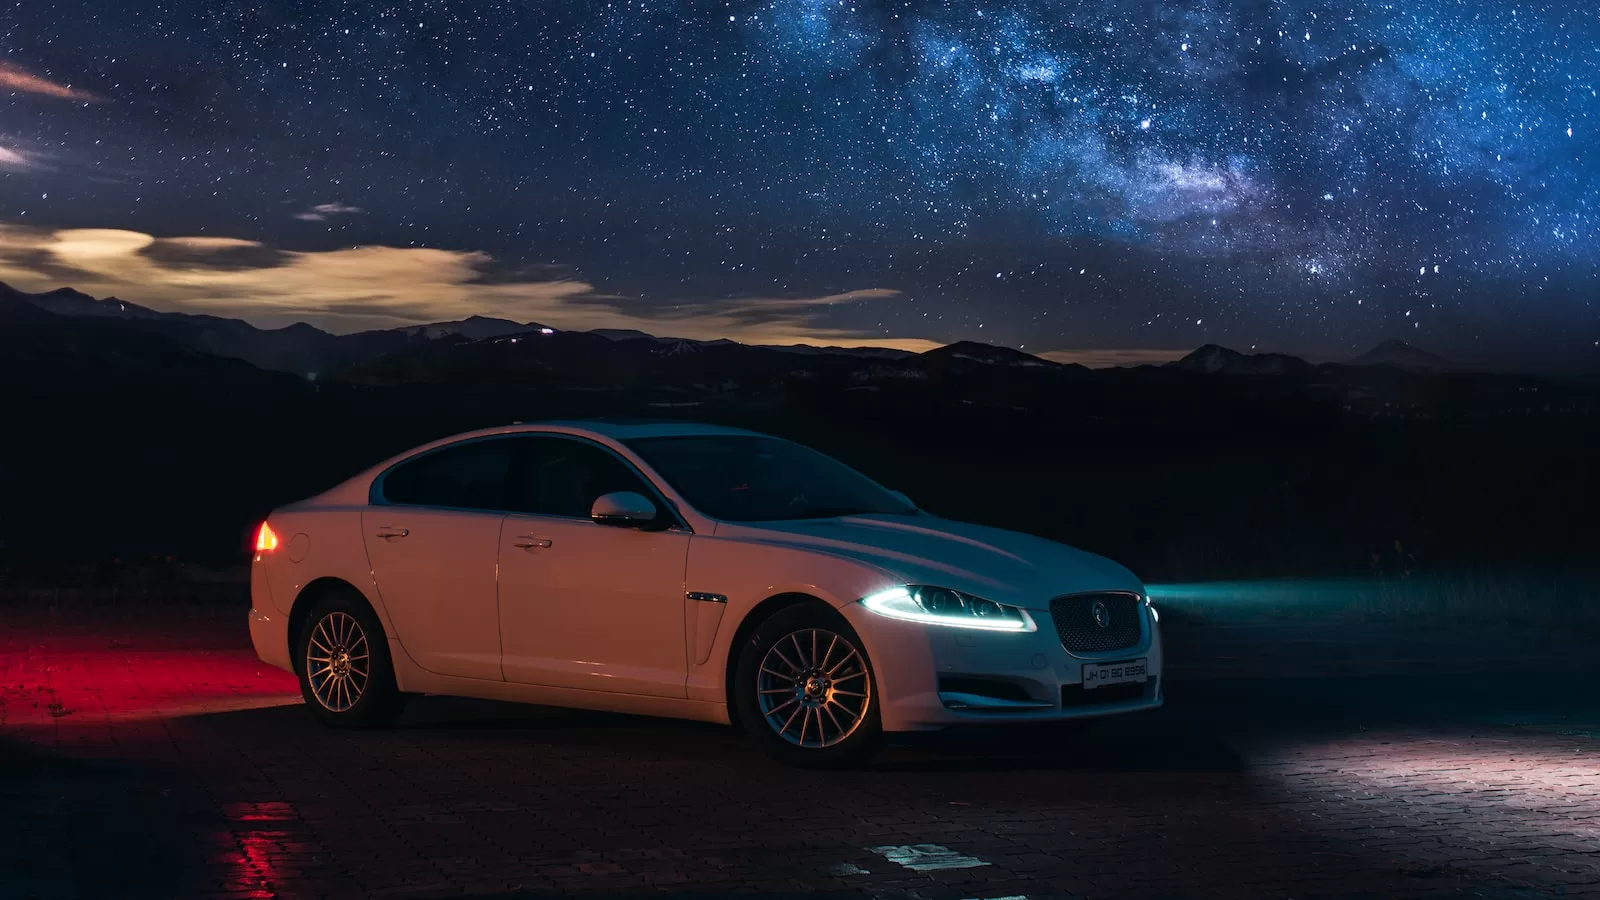 a white car parked in front of a night sky filled with stars